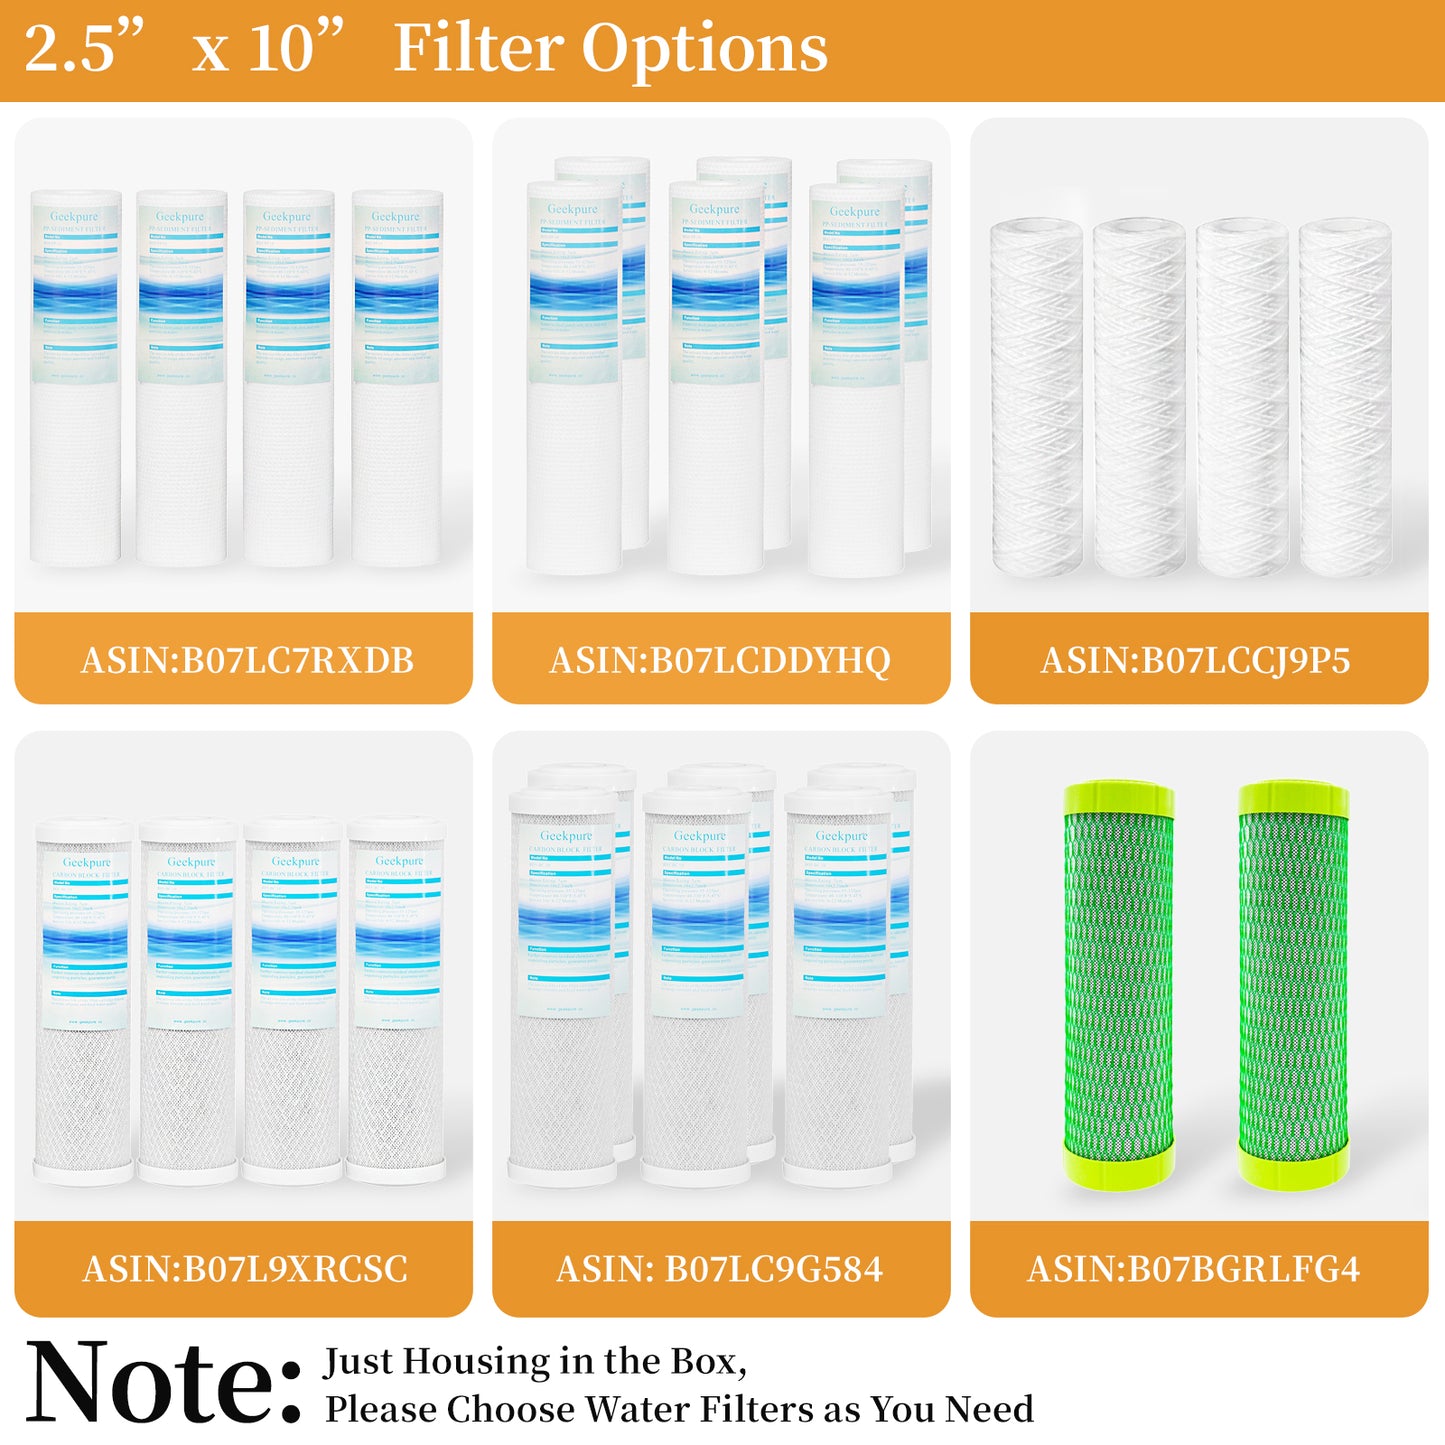 10 Inch Whole House Water Filter Blue Housing-3/4" NPT-Fit for 2.5"x10" Filters